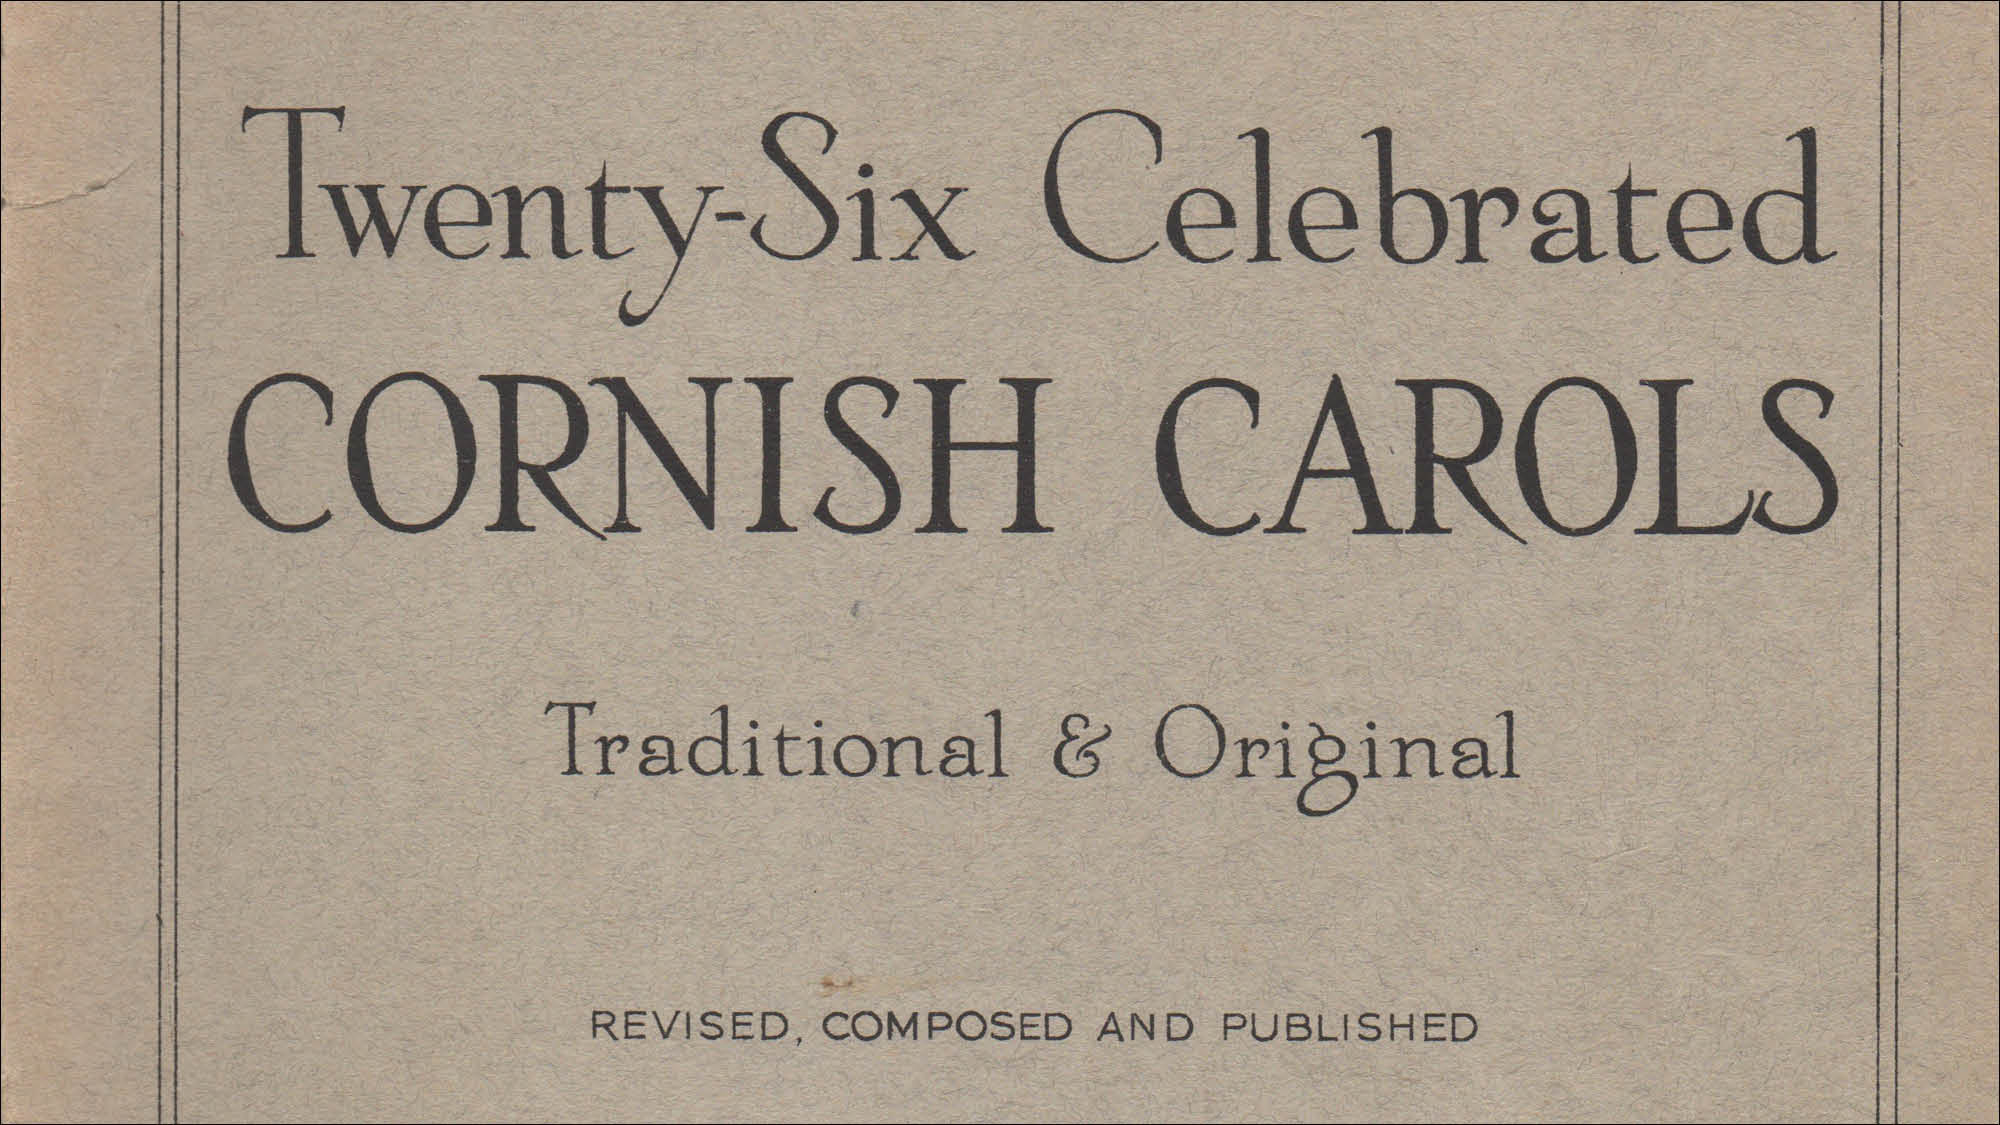 reproduction of book title page: "26 Celebrated Cornish Carols"